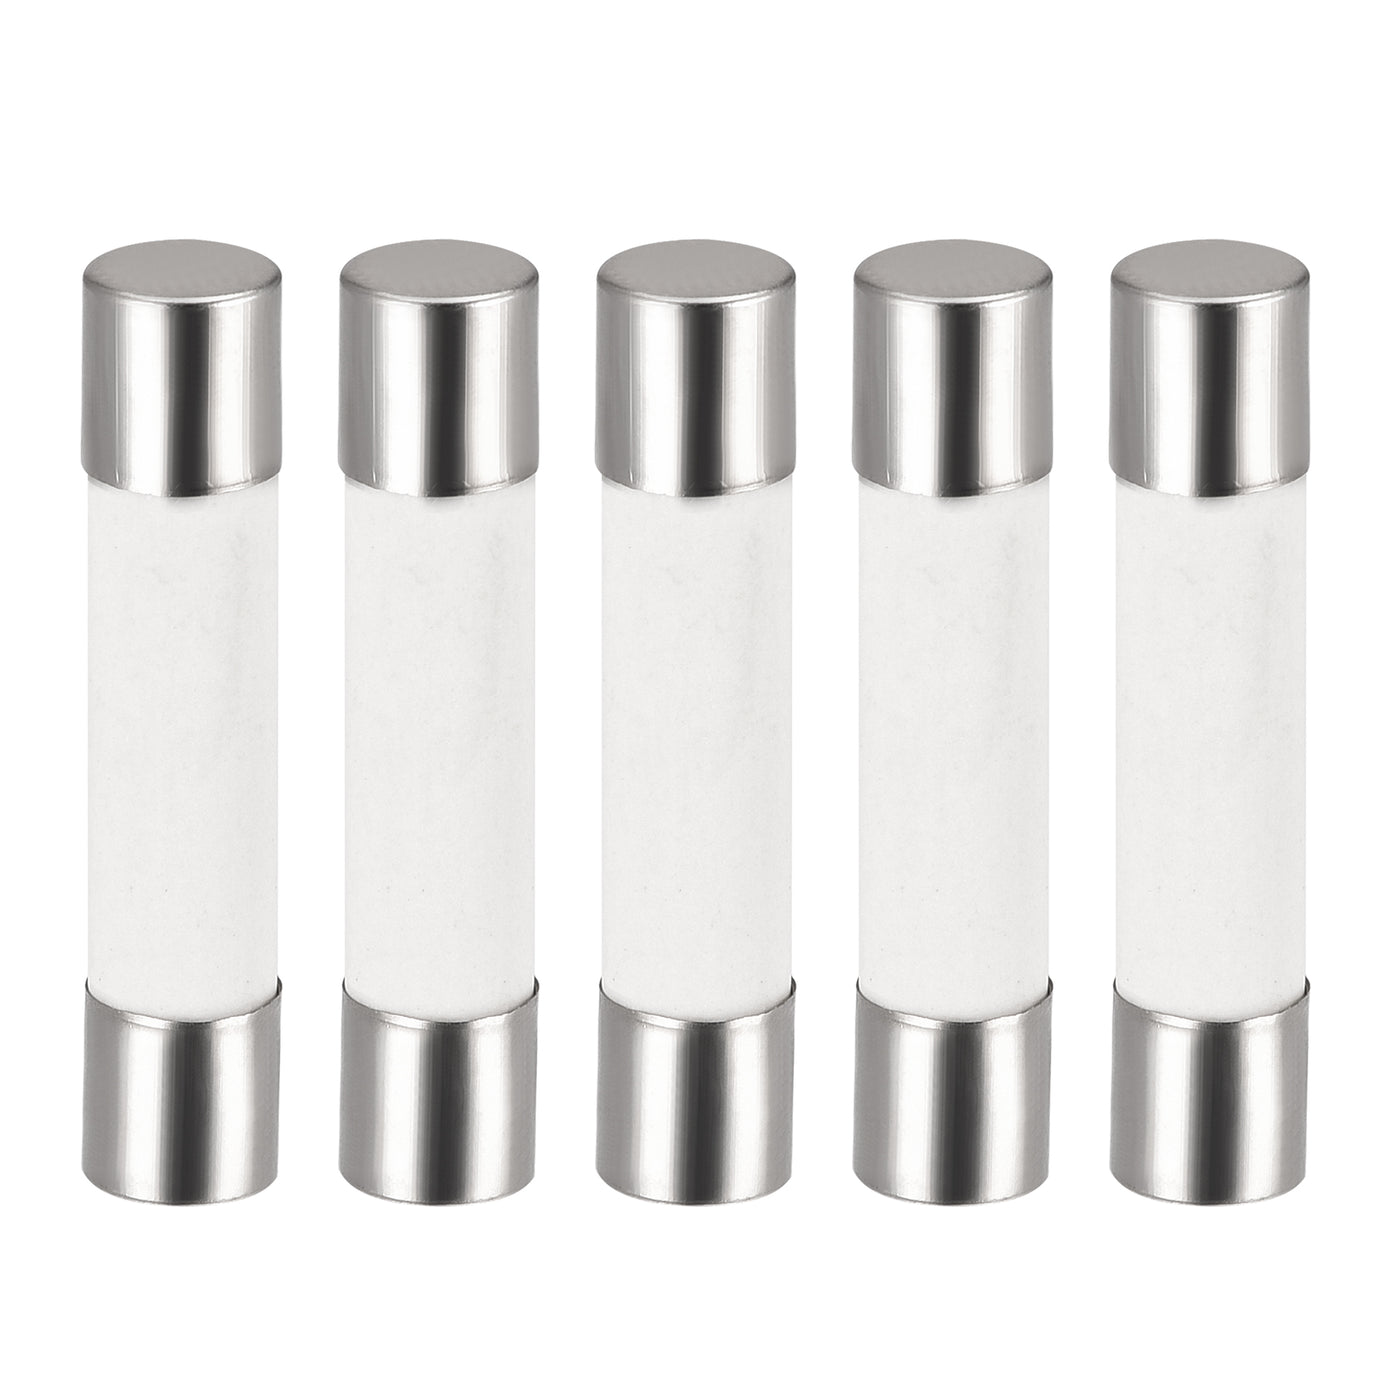 uxcell Uxcell Ceramic Cartridge Fuses 7A 250V 6x30mm Fast Blow for Energy Saving Lamp 5pcs